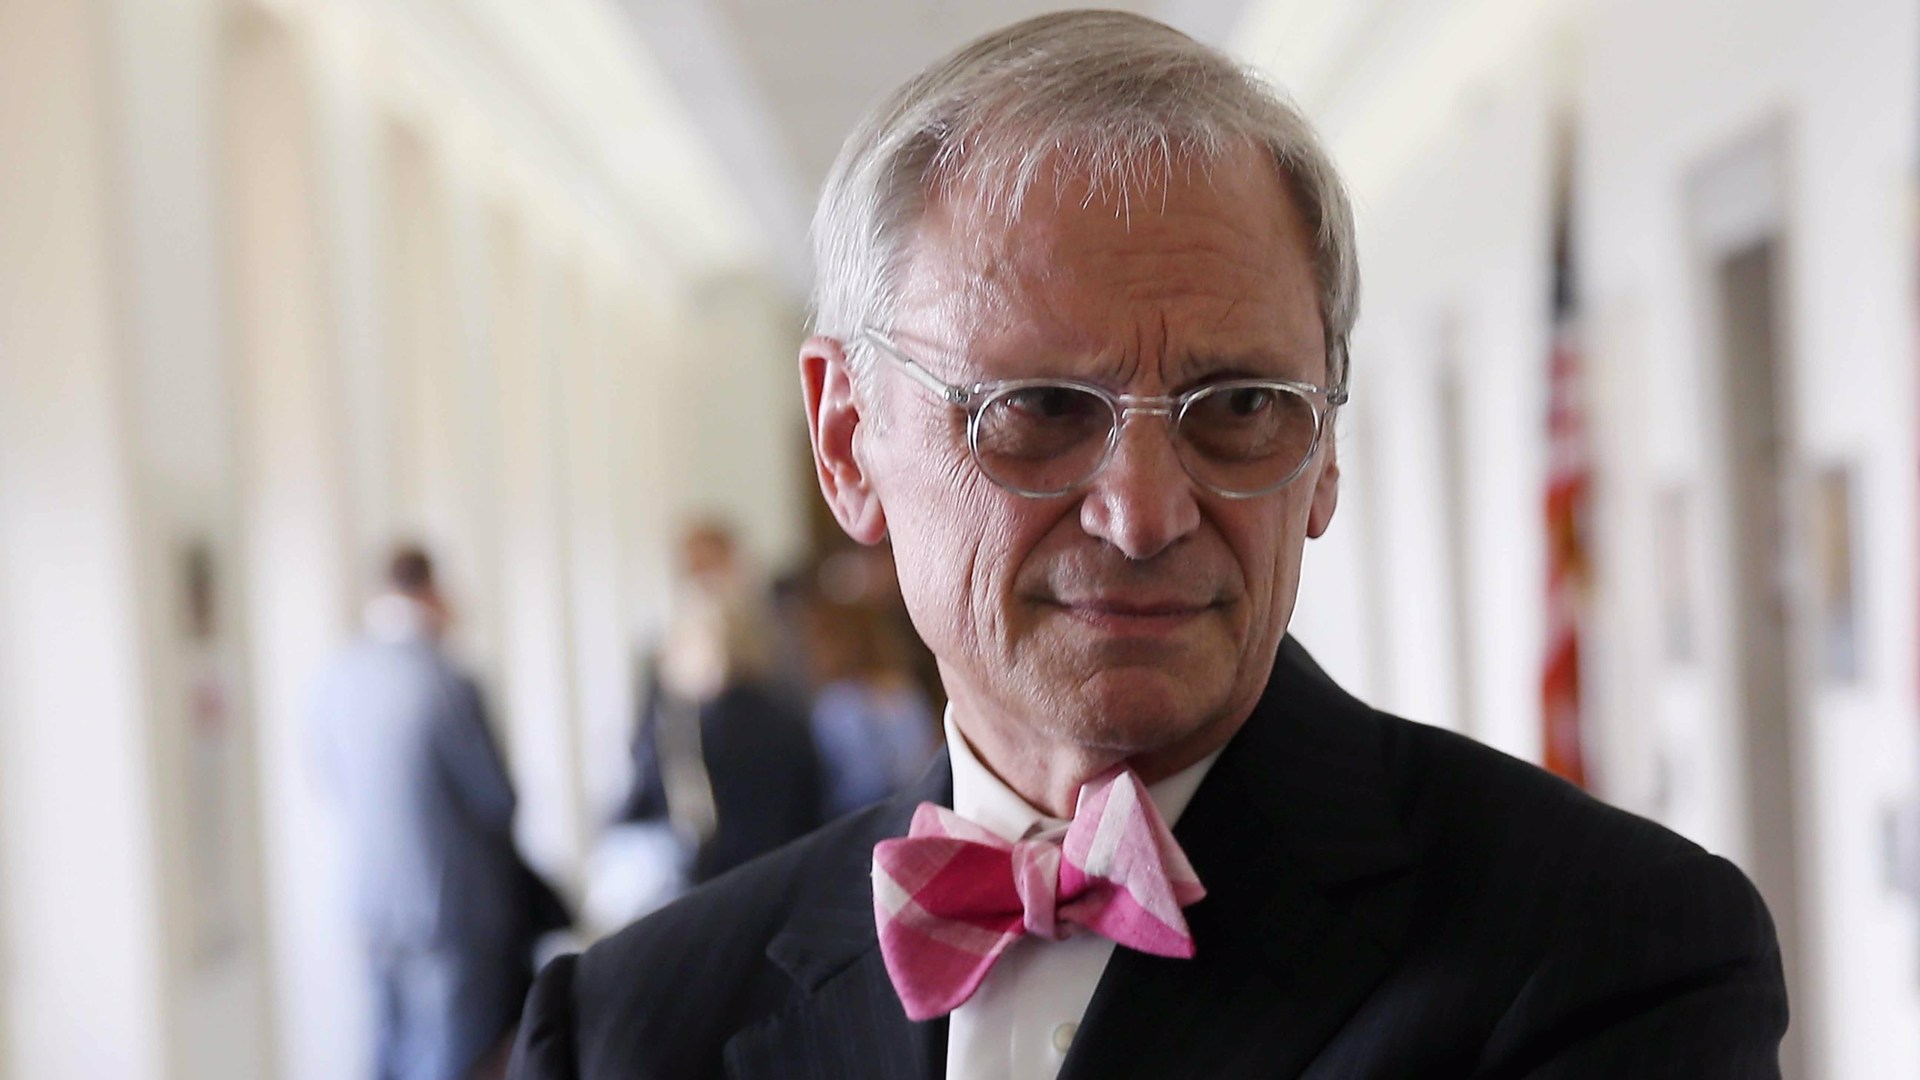 Oregon Democratic congressman Earl Blumenauer wants to declare a climate emergency. He also discusses his plan to end homelessness and add affordable housing.